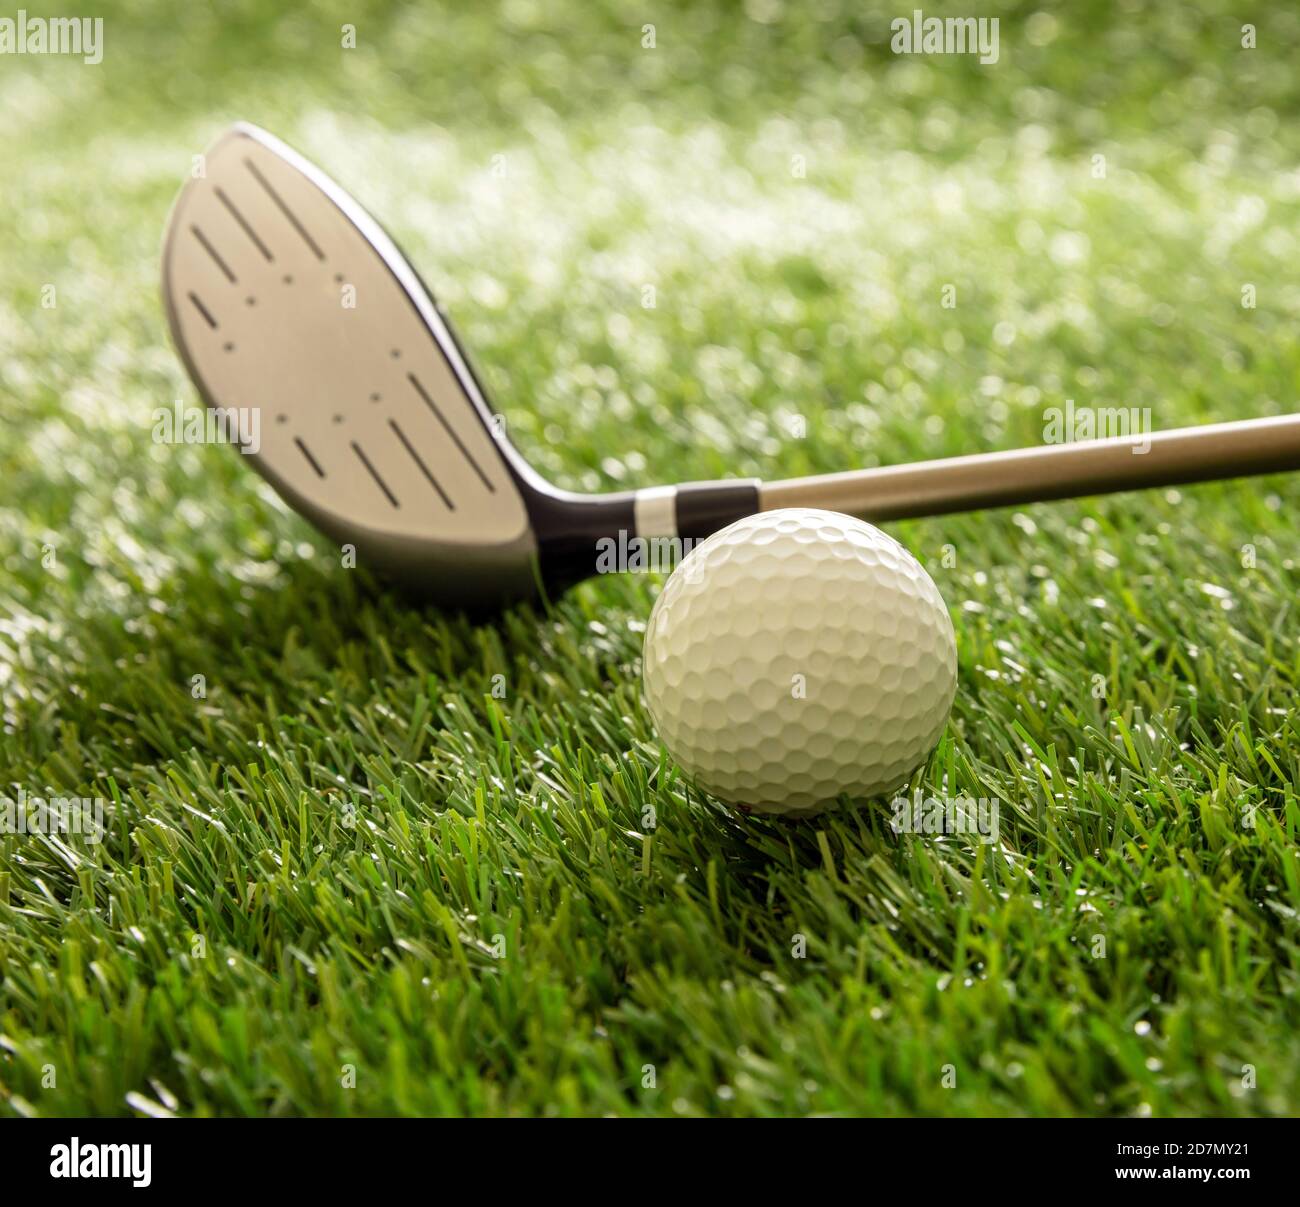 Golf ball and club on green course lawn, sunlight reflections, close up view. Golfing sport equipment and club concept. Stock Photo